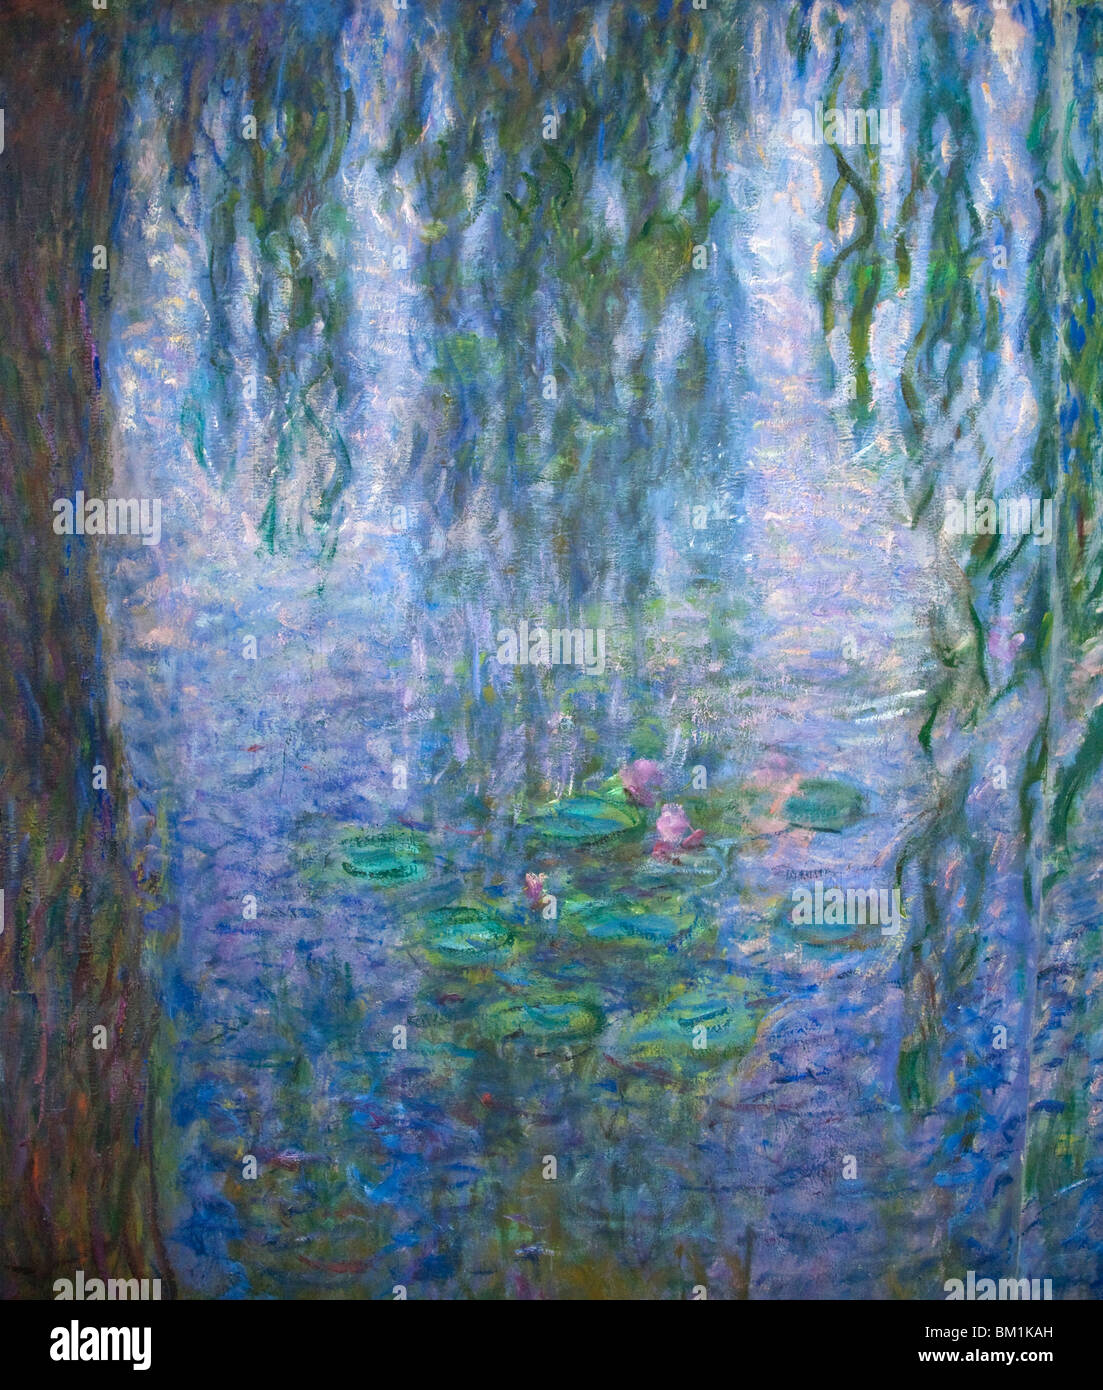 Detail of Water Lily Nympheas series painted by Claude Monet at Musee de LOrangerie Tuileries Paris France Europe EU Stock Photo